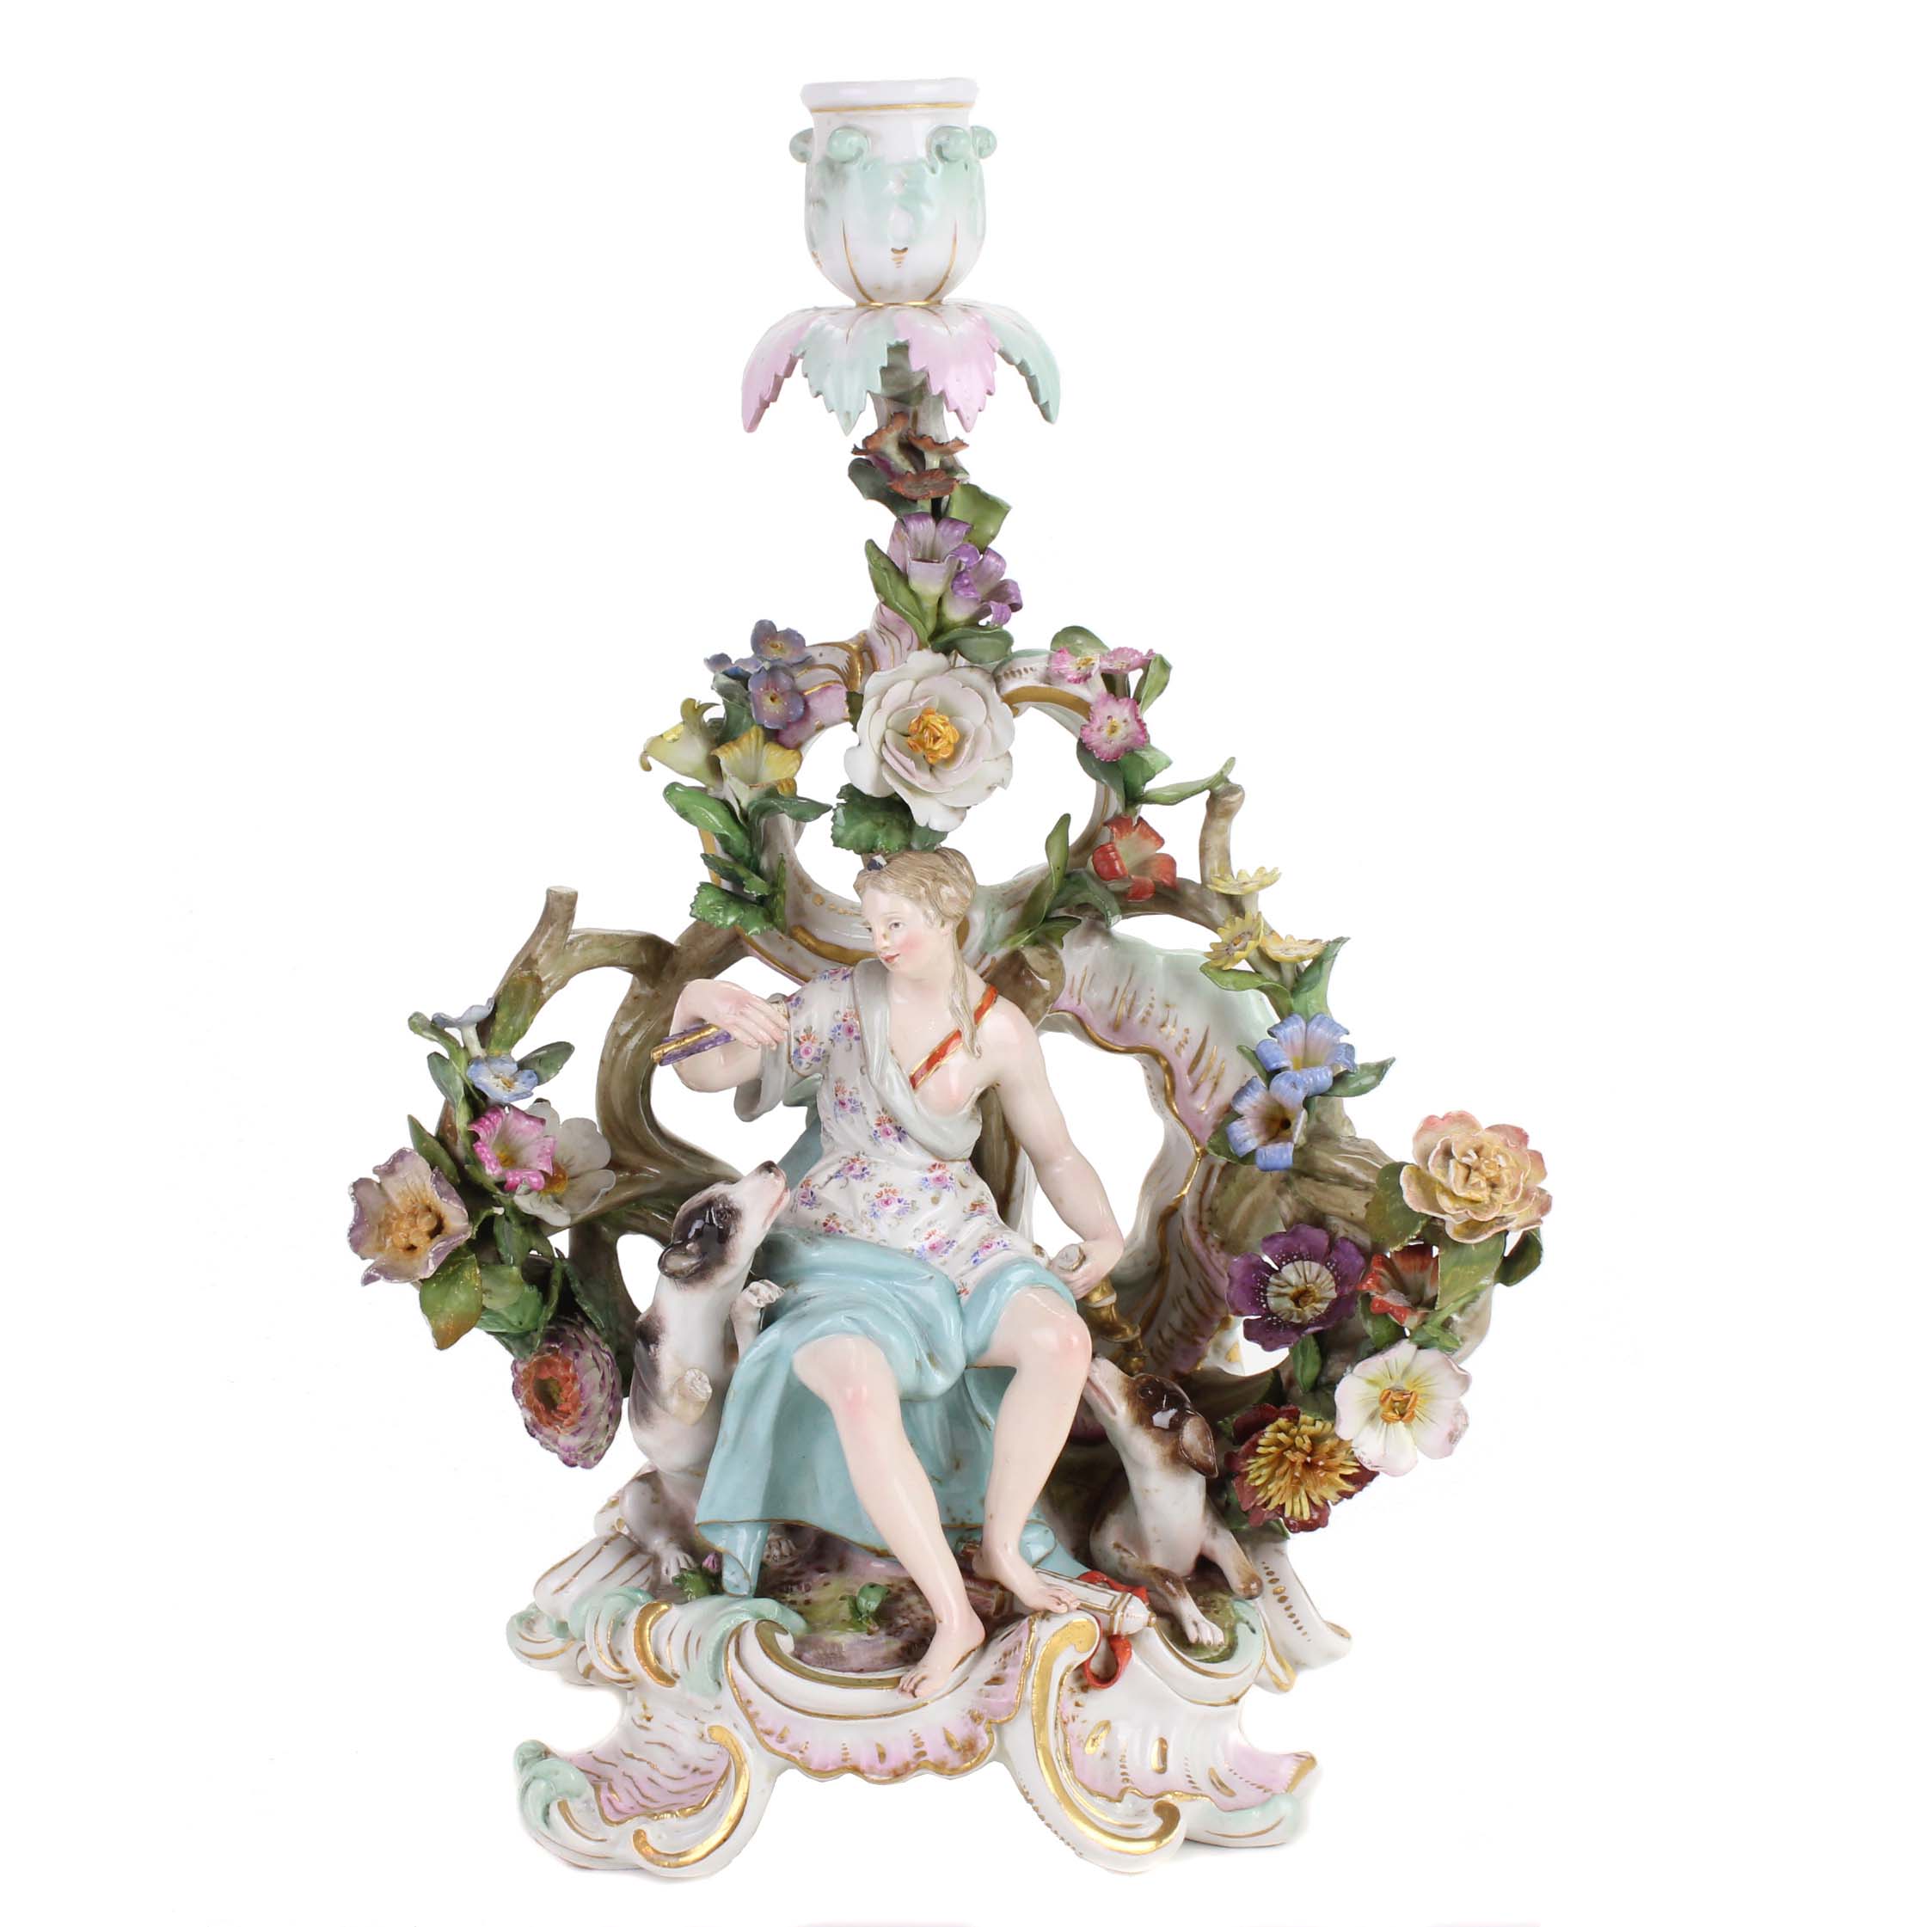 MEISSEN. "DIANA" CANDLESTICK, END C19th